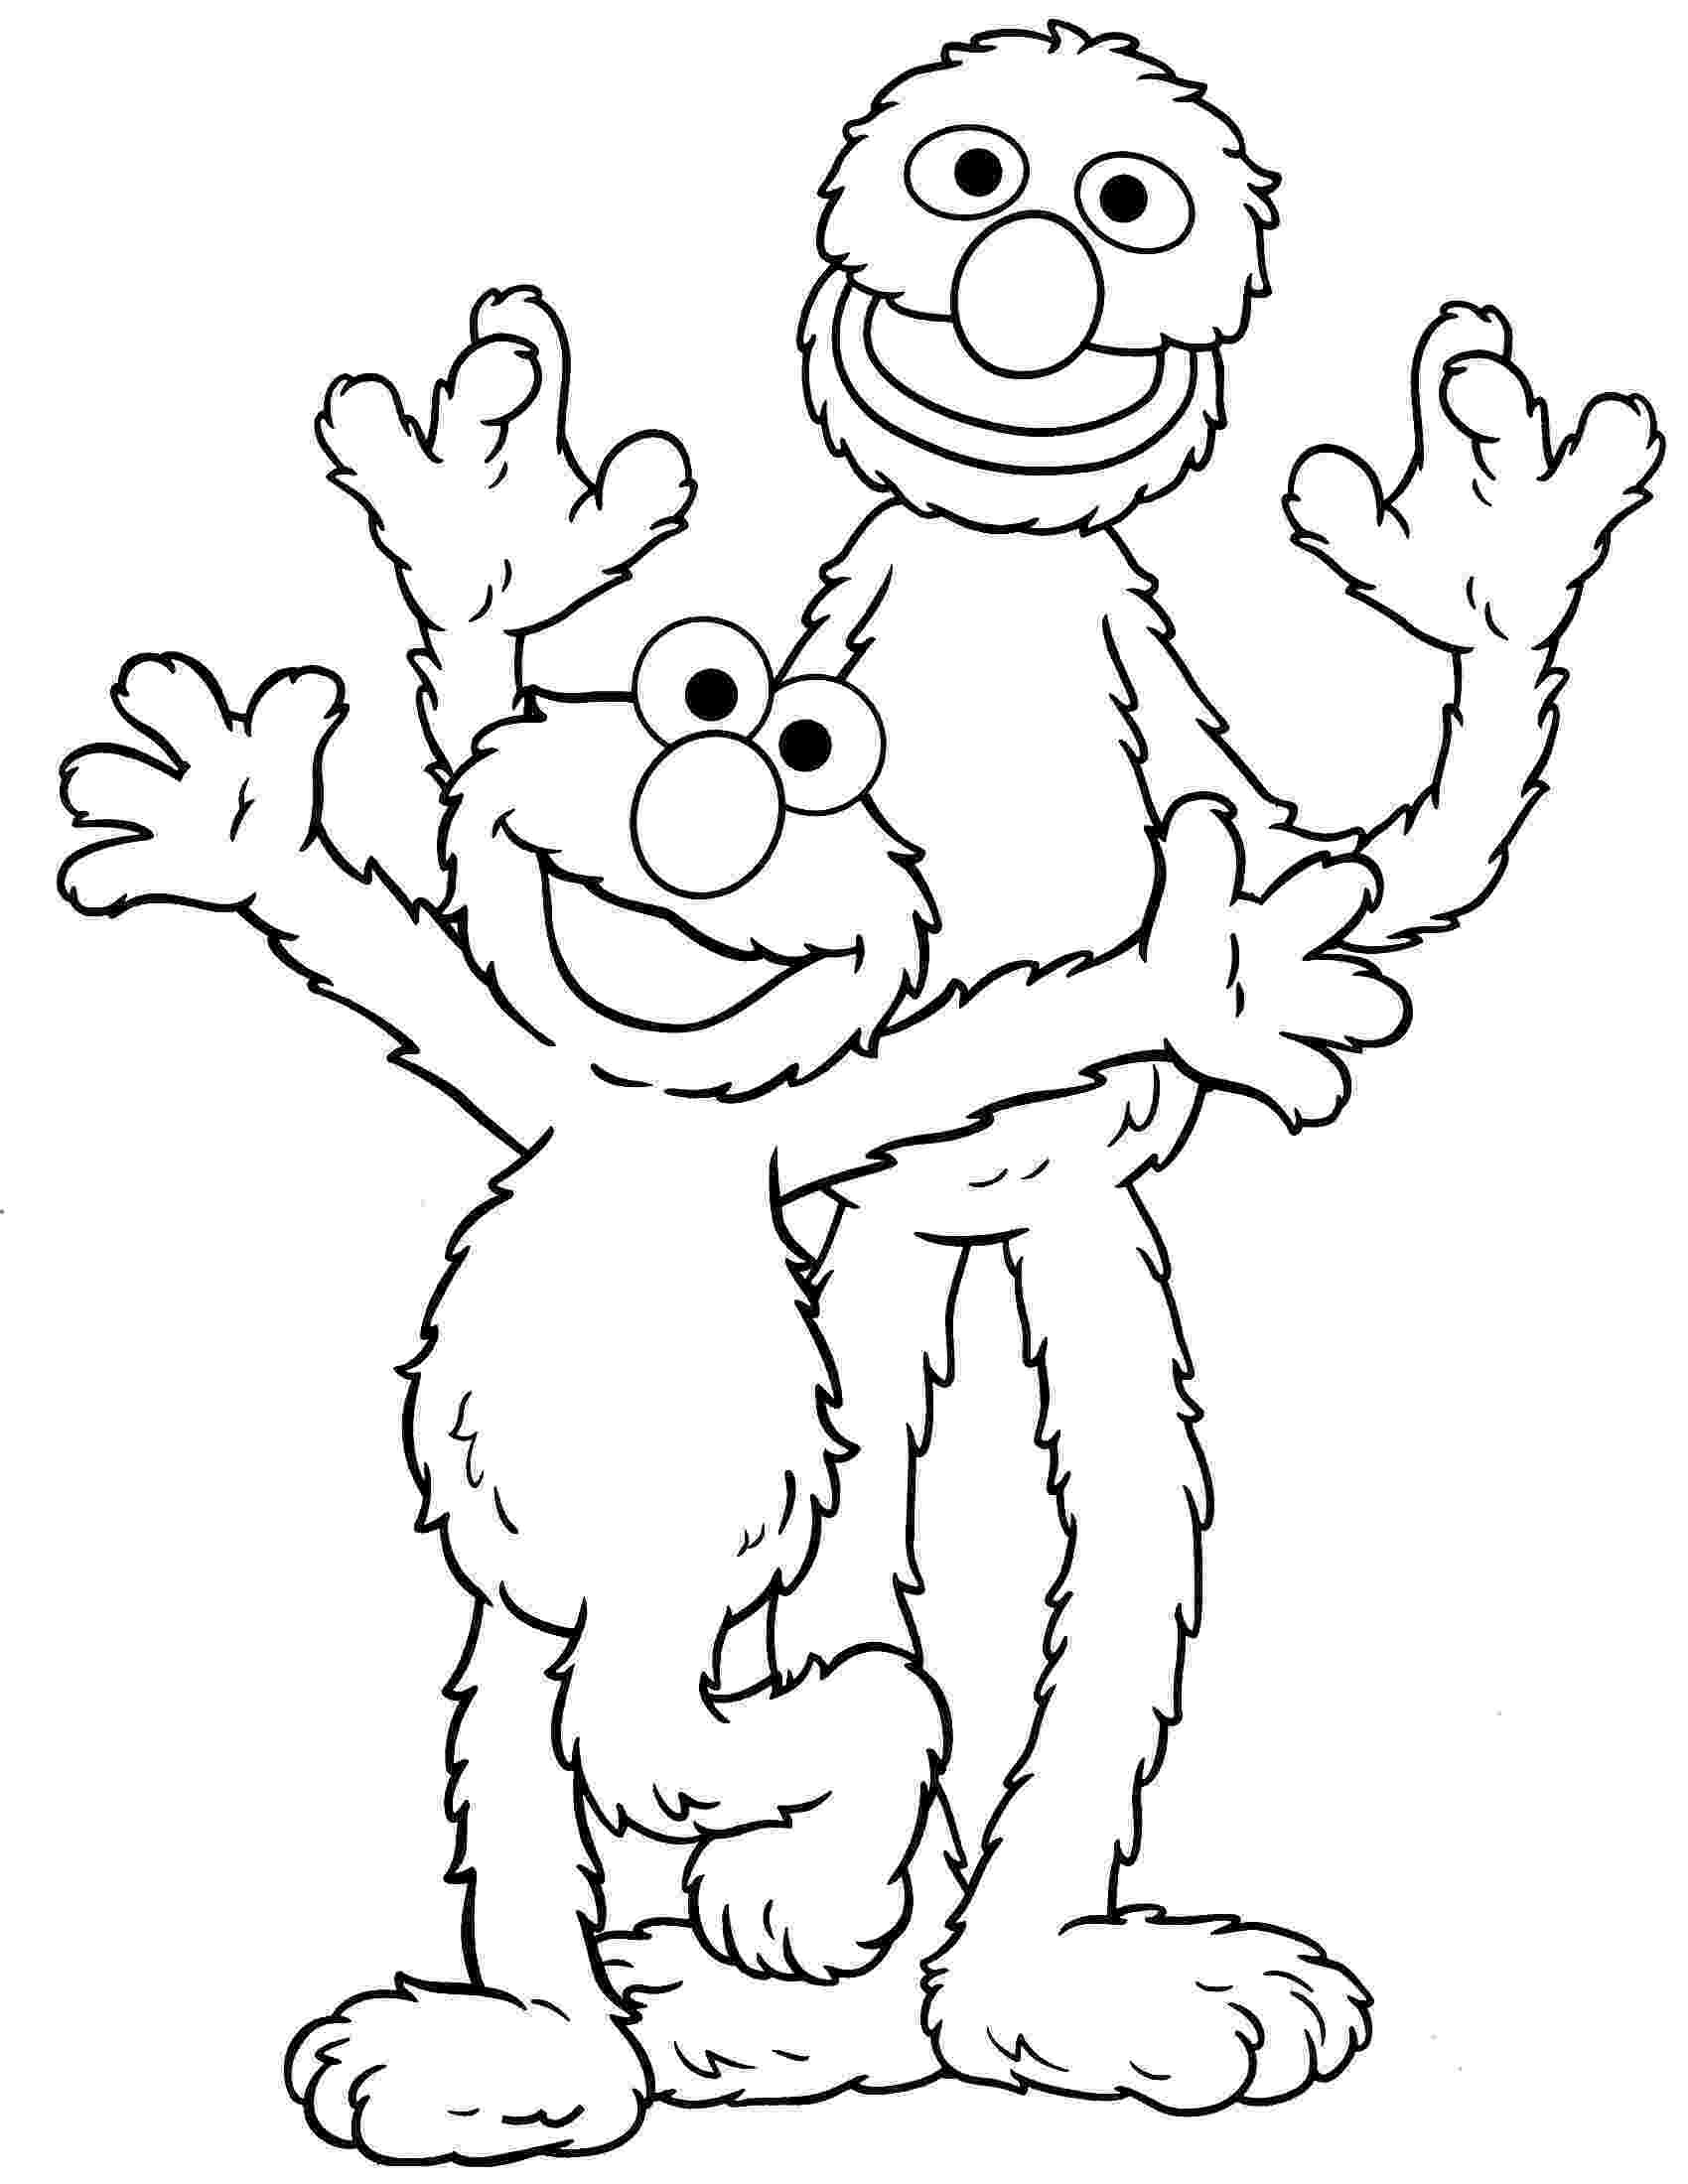 sesame street characters pictures to print printable pictures of sesame street characters coloring home characters pictures sesame to print street 